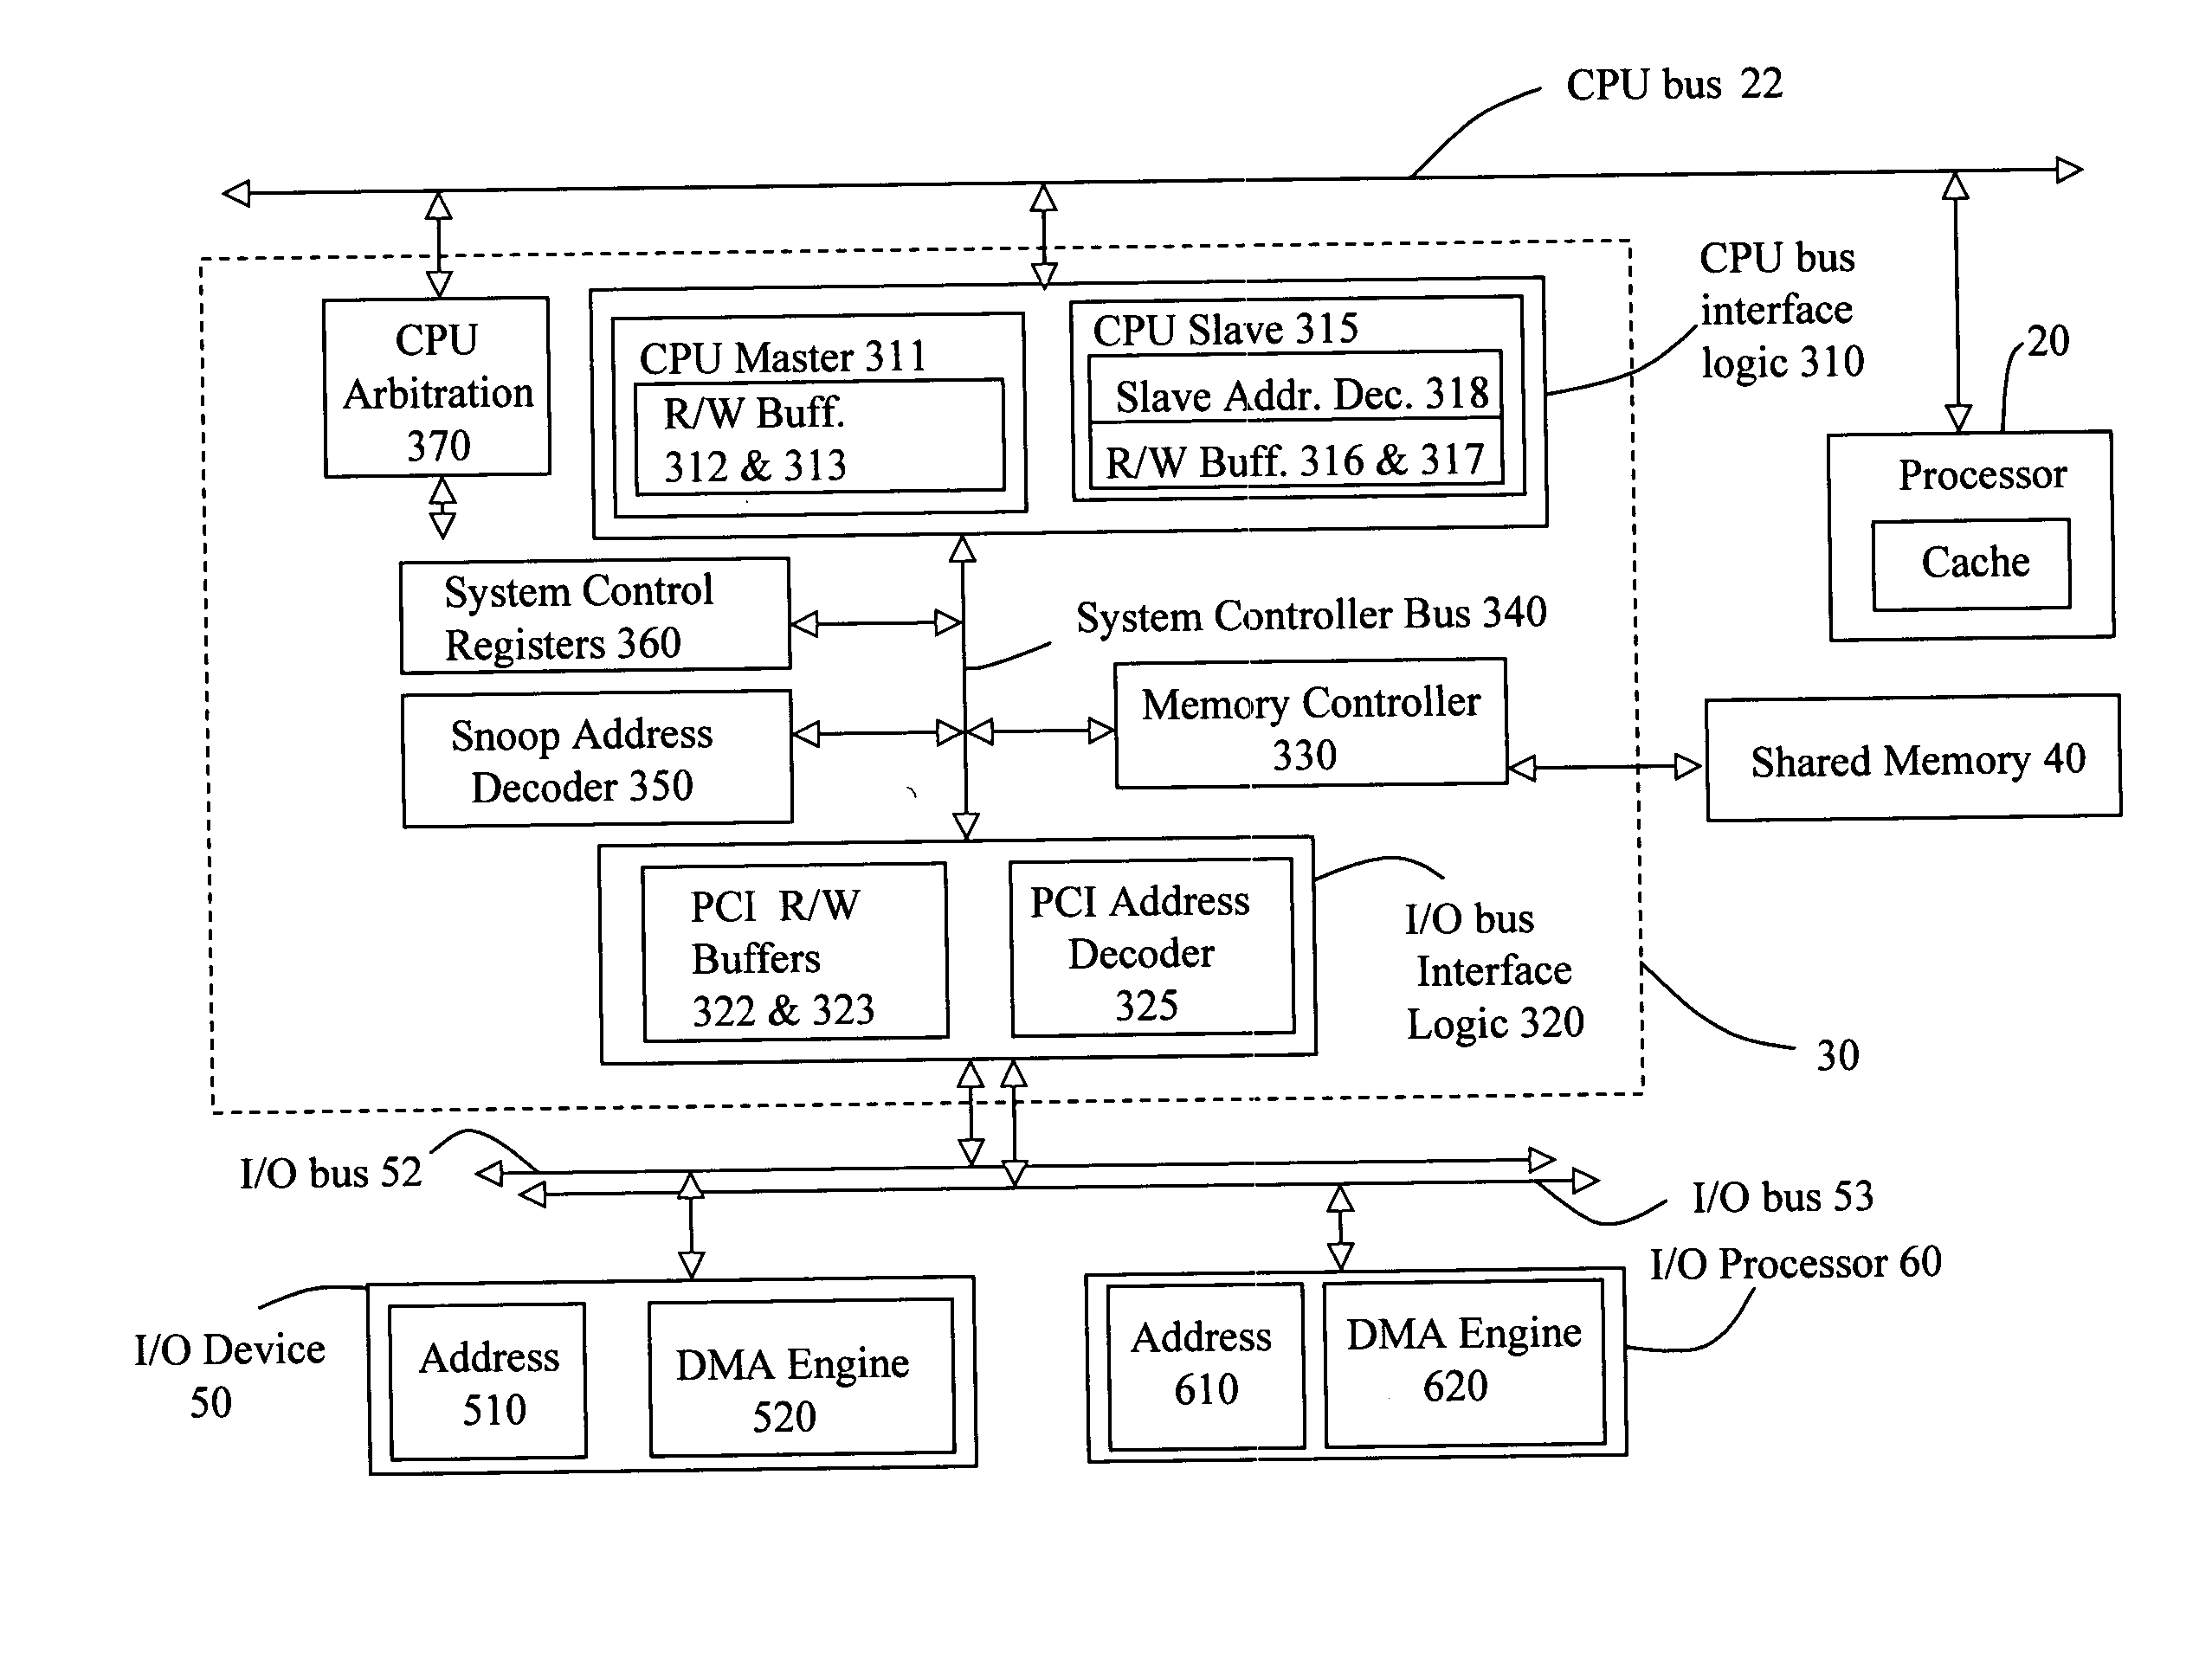 Method for efficiently processing DMA transactions